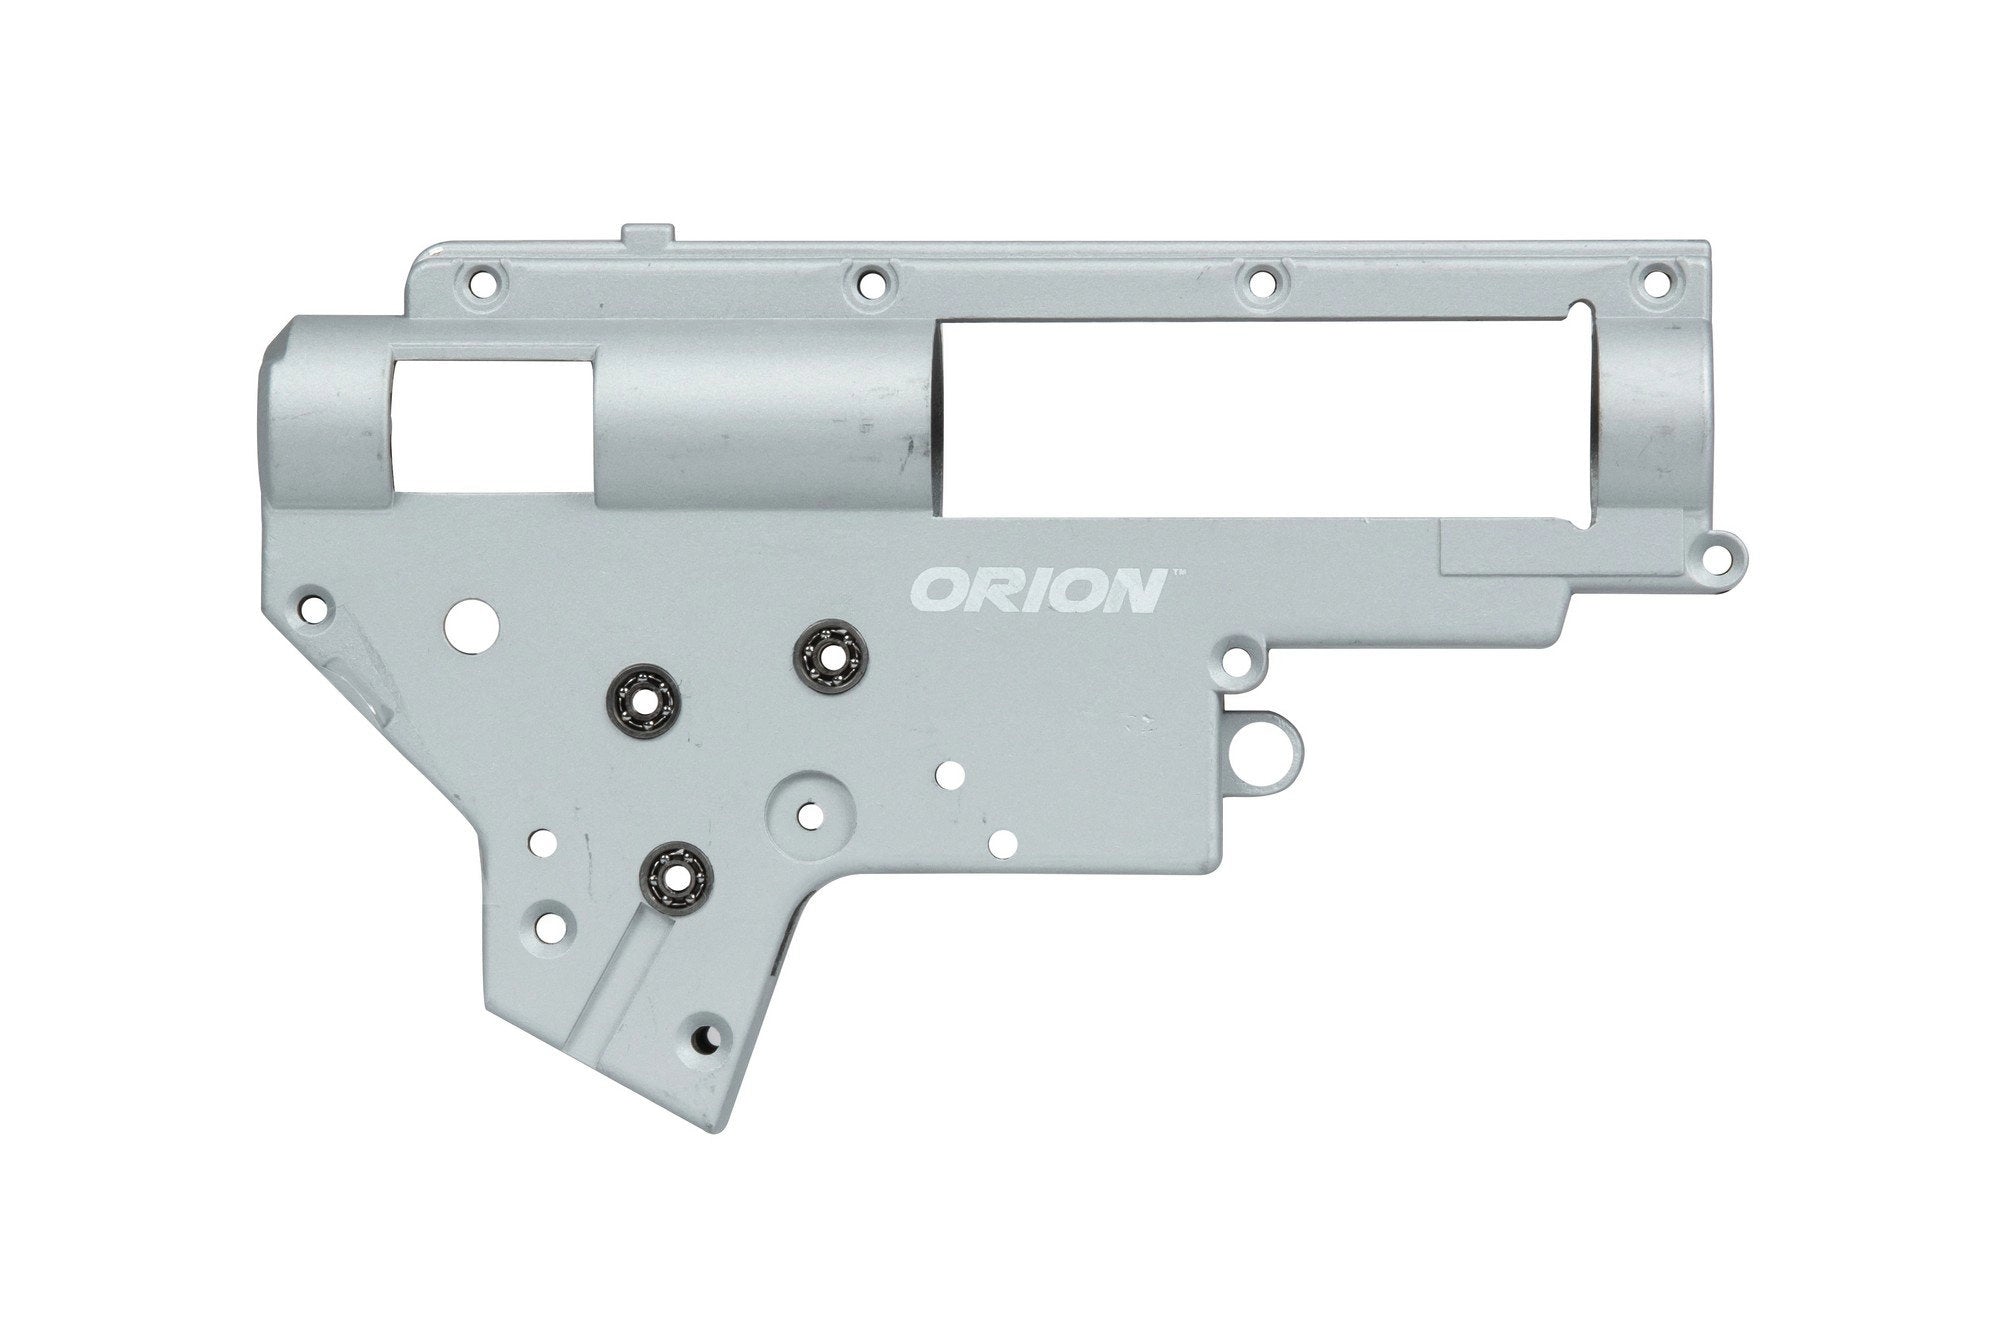 ORION™ V2 Gearbox